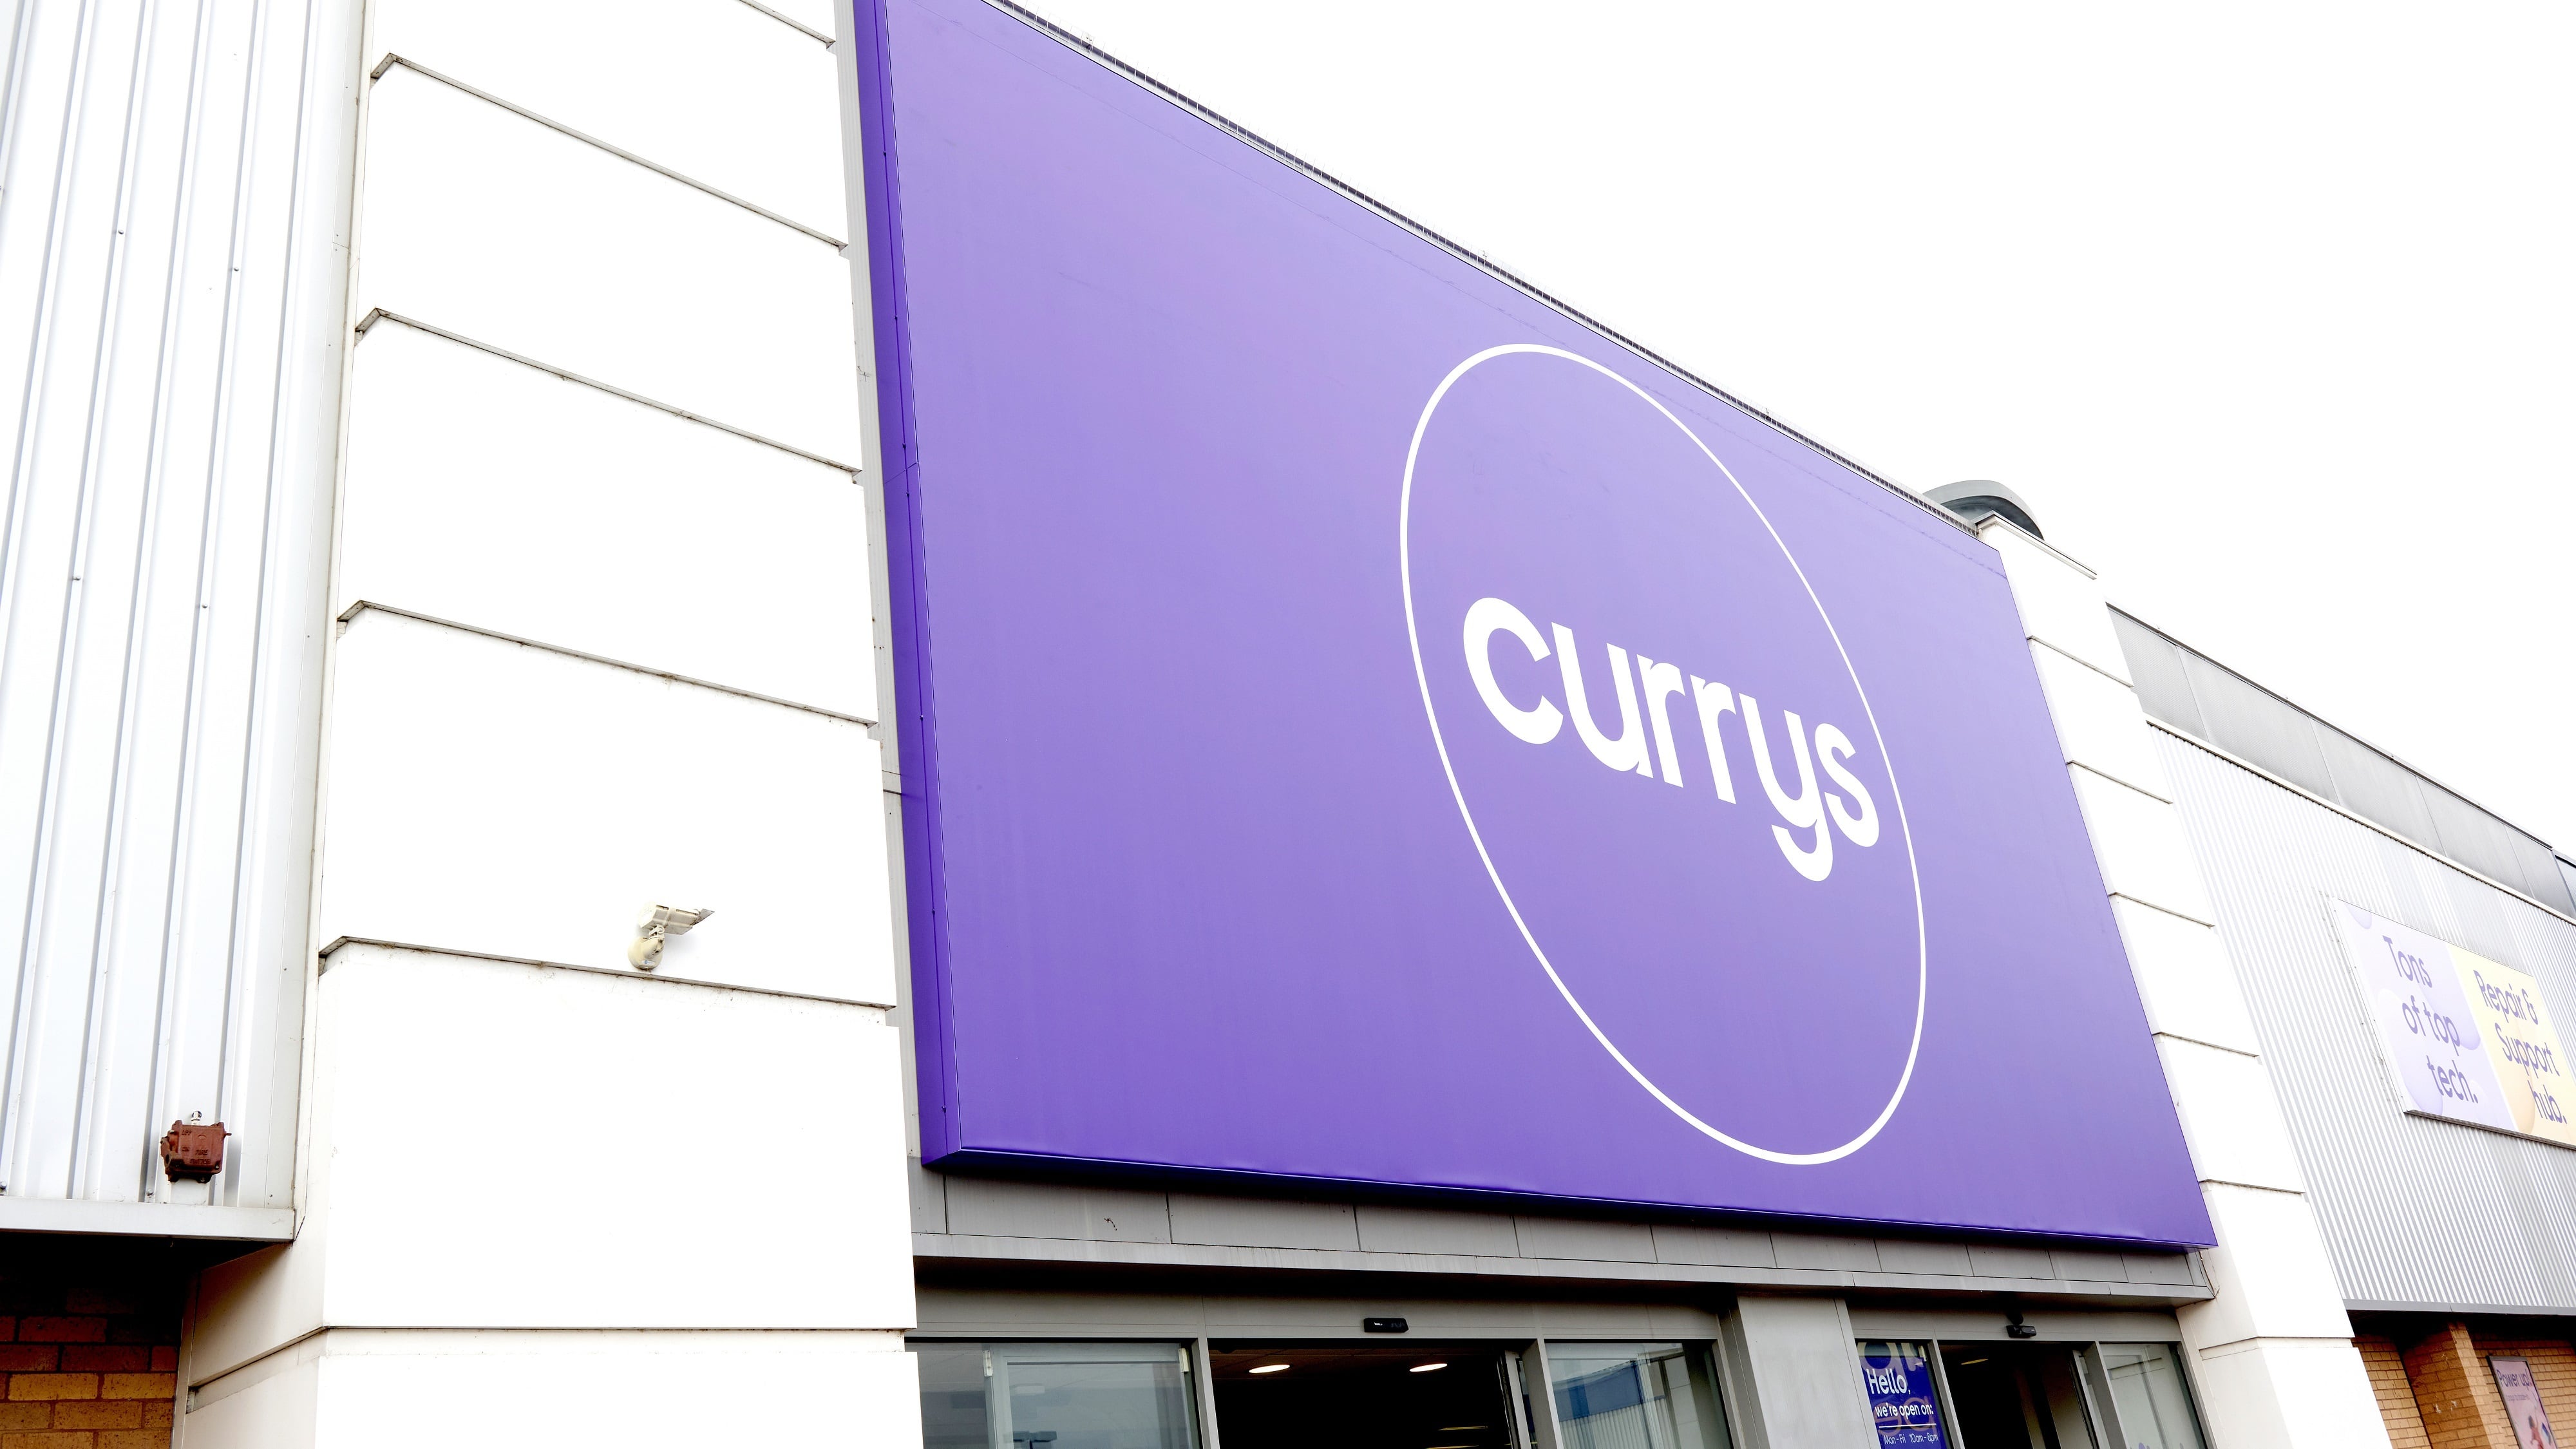 Currys has revealed its sales slipped over the crucial Christmas period